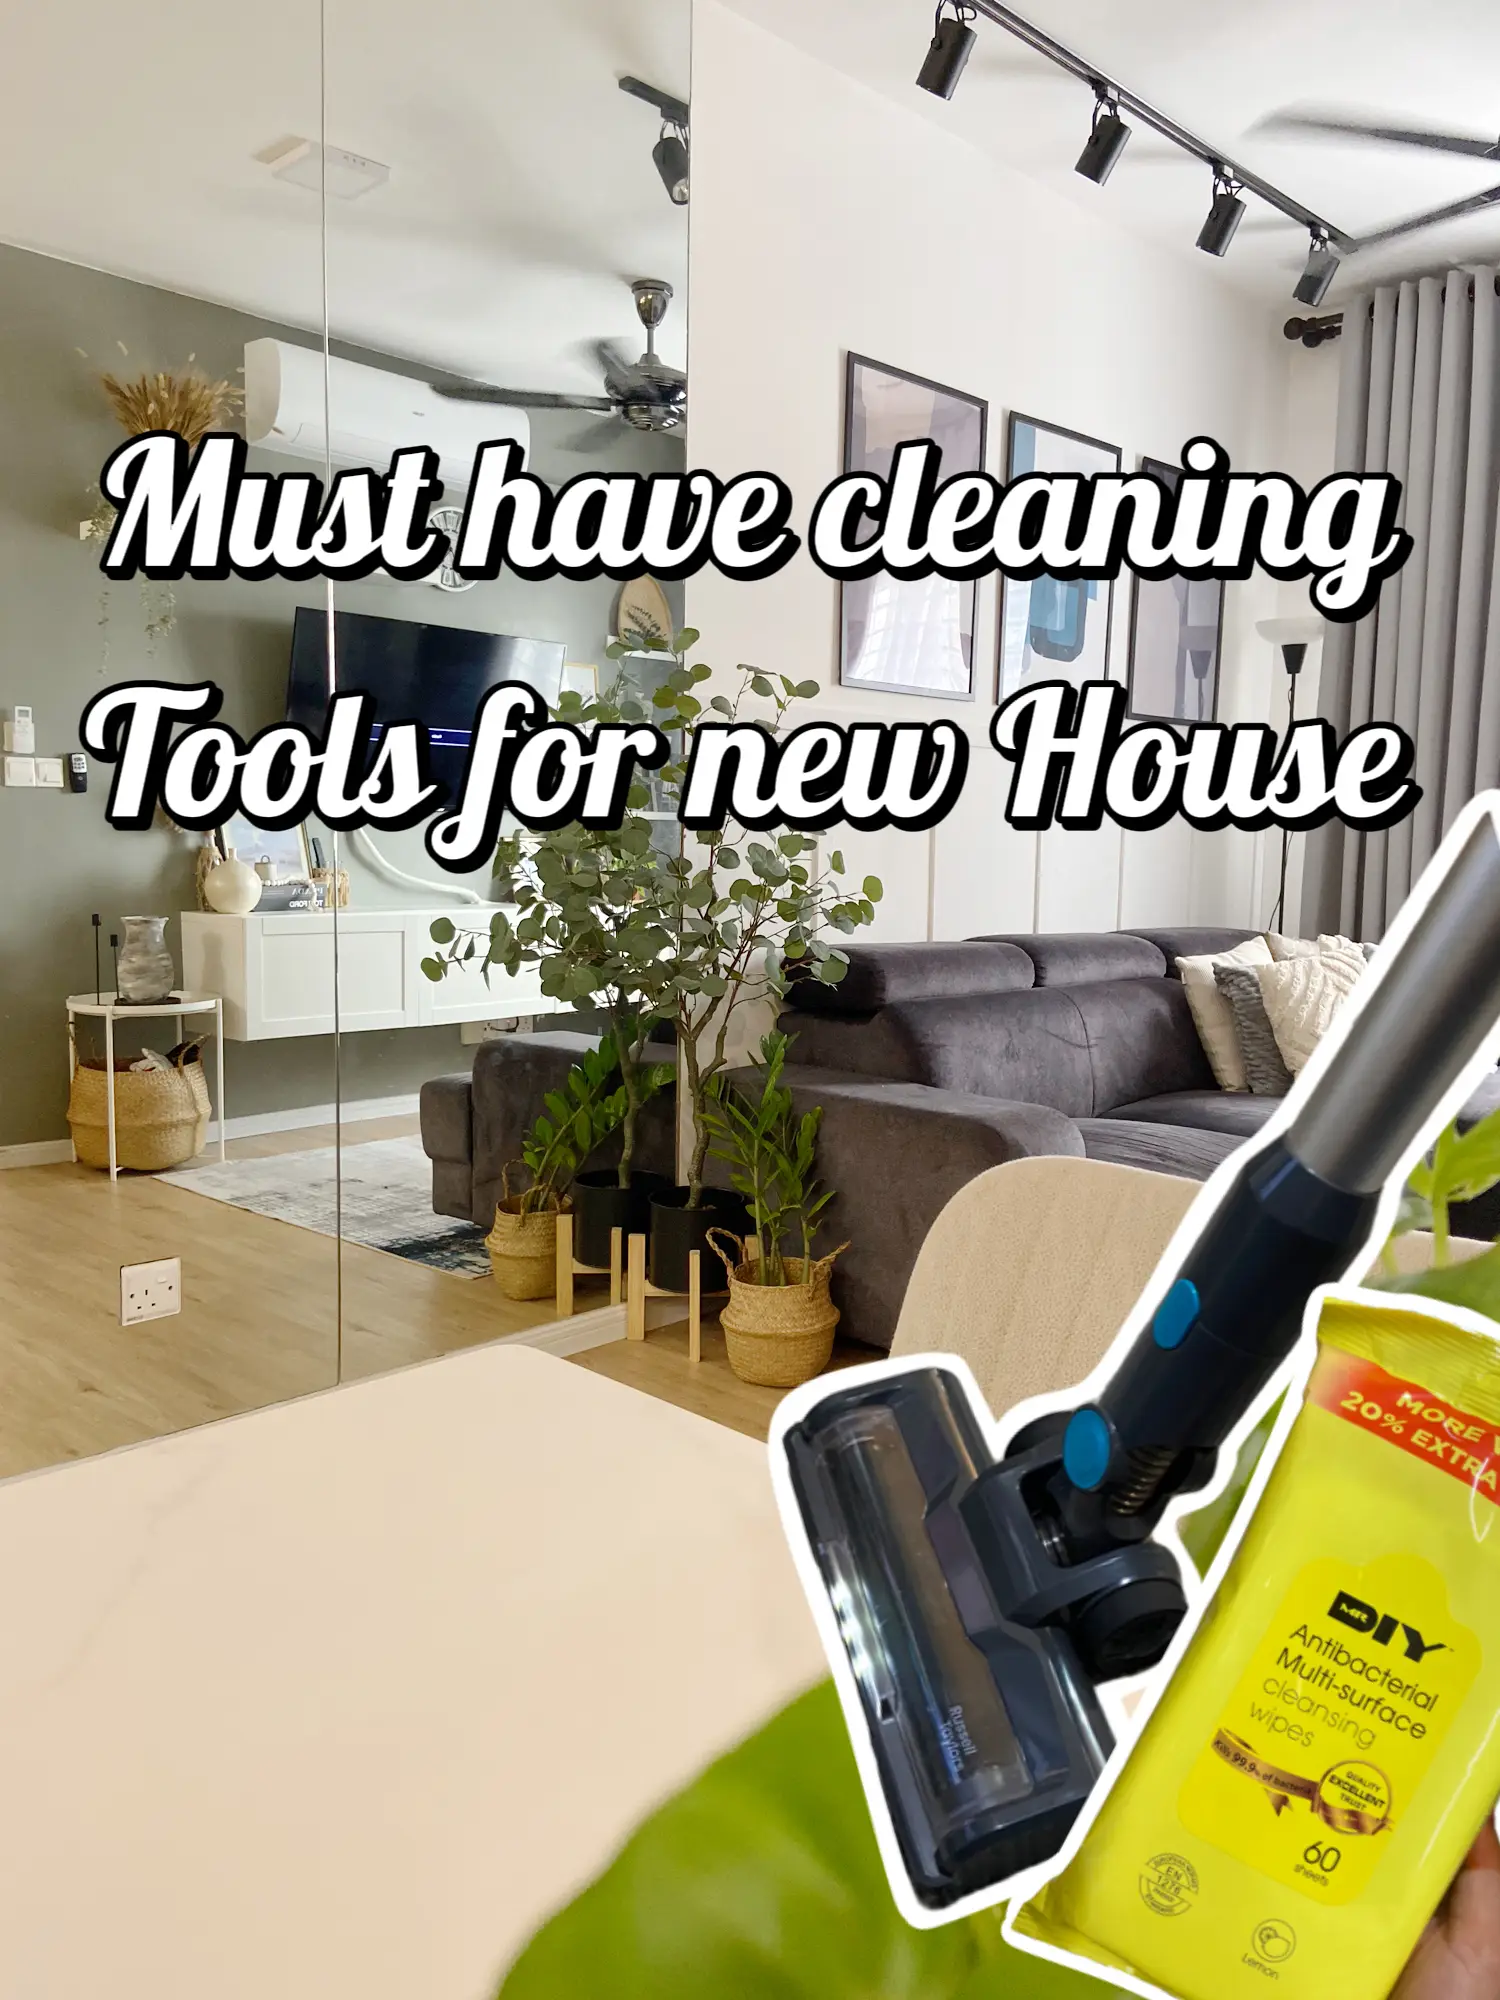 Must have cleaning tools for new House, Gallery posted by Lina_B.home